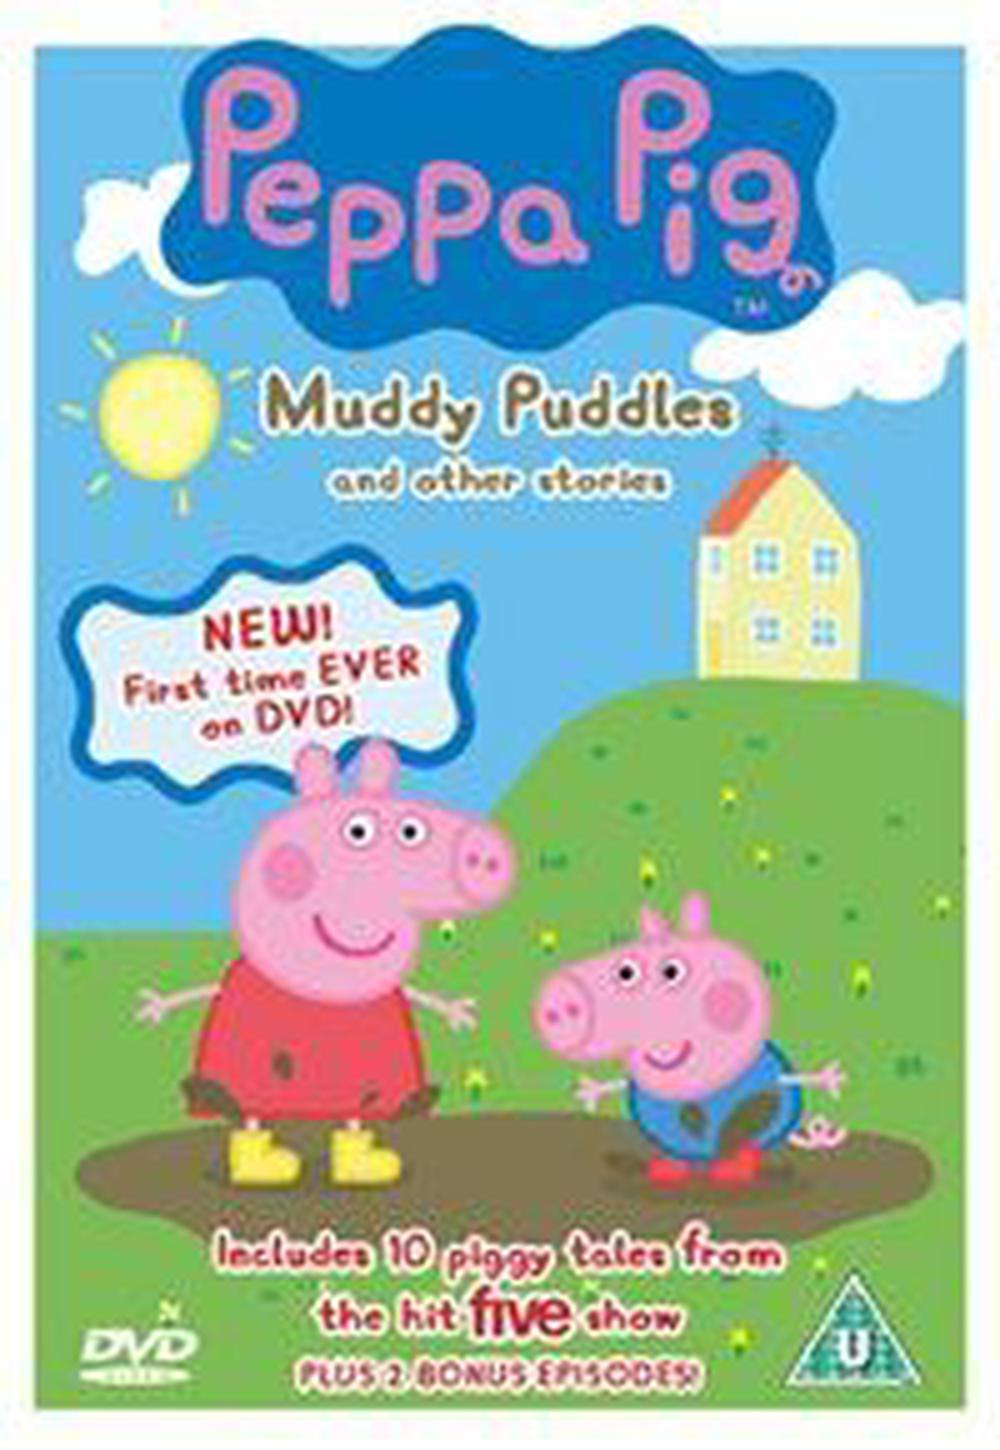 Peppa Pig Muddy Puddles And Other Stories Dvd Region 2 Free Shipping